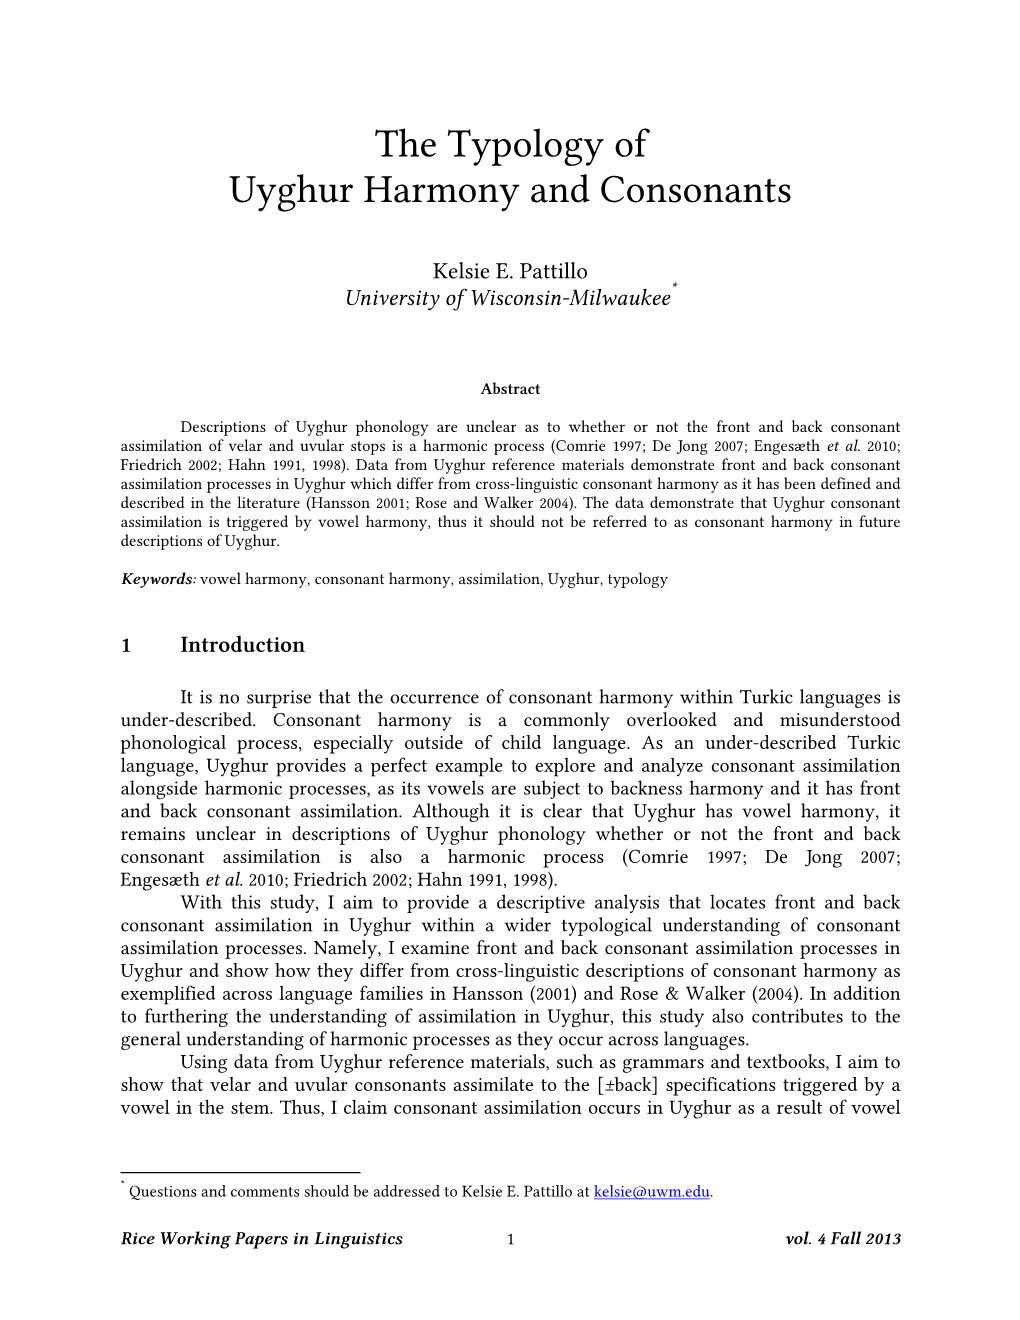 The Typology of Uyghur Harmony and Consonants